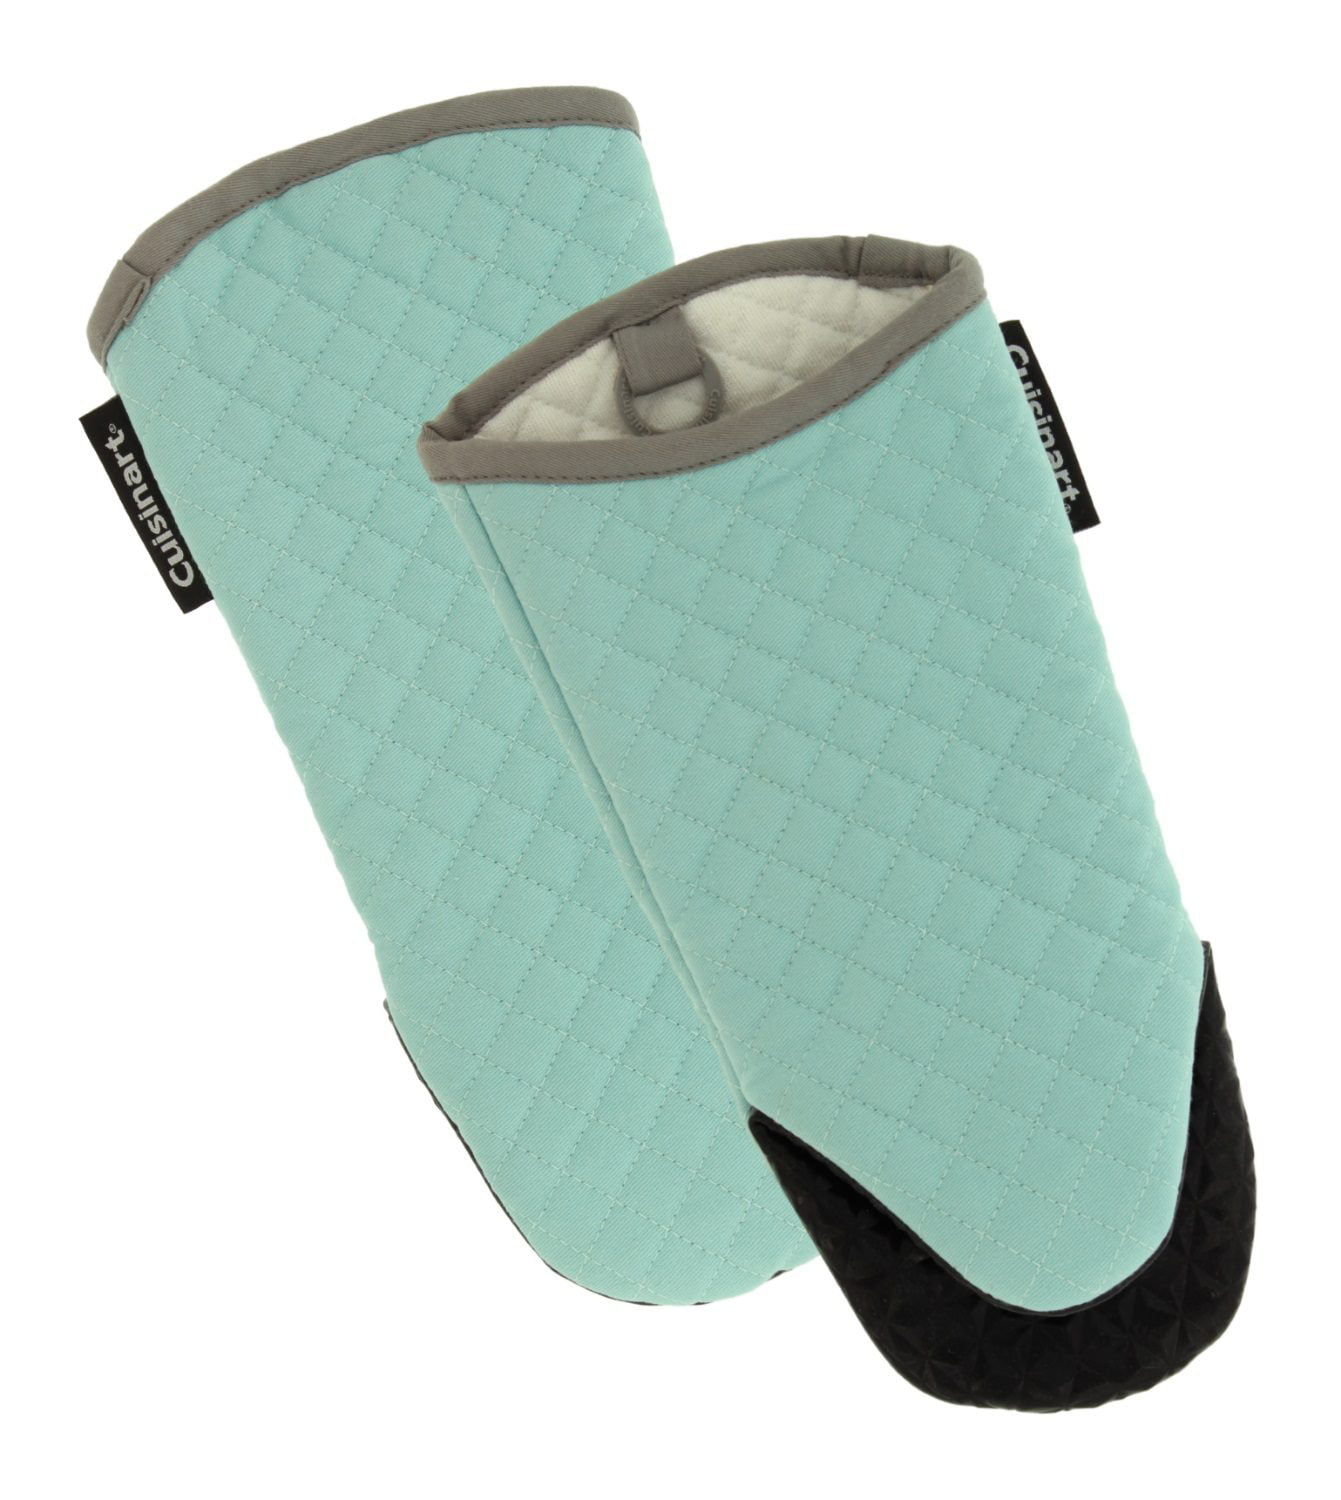 Turquoise Blue Floral Oven Gloves Double Handed Quilted Oven Gloves Oven Mitts